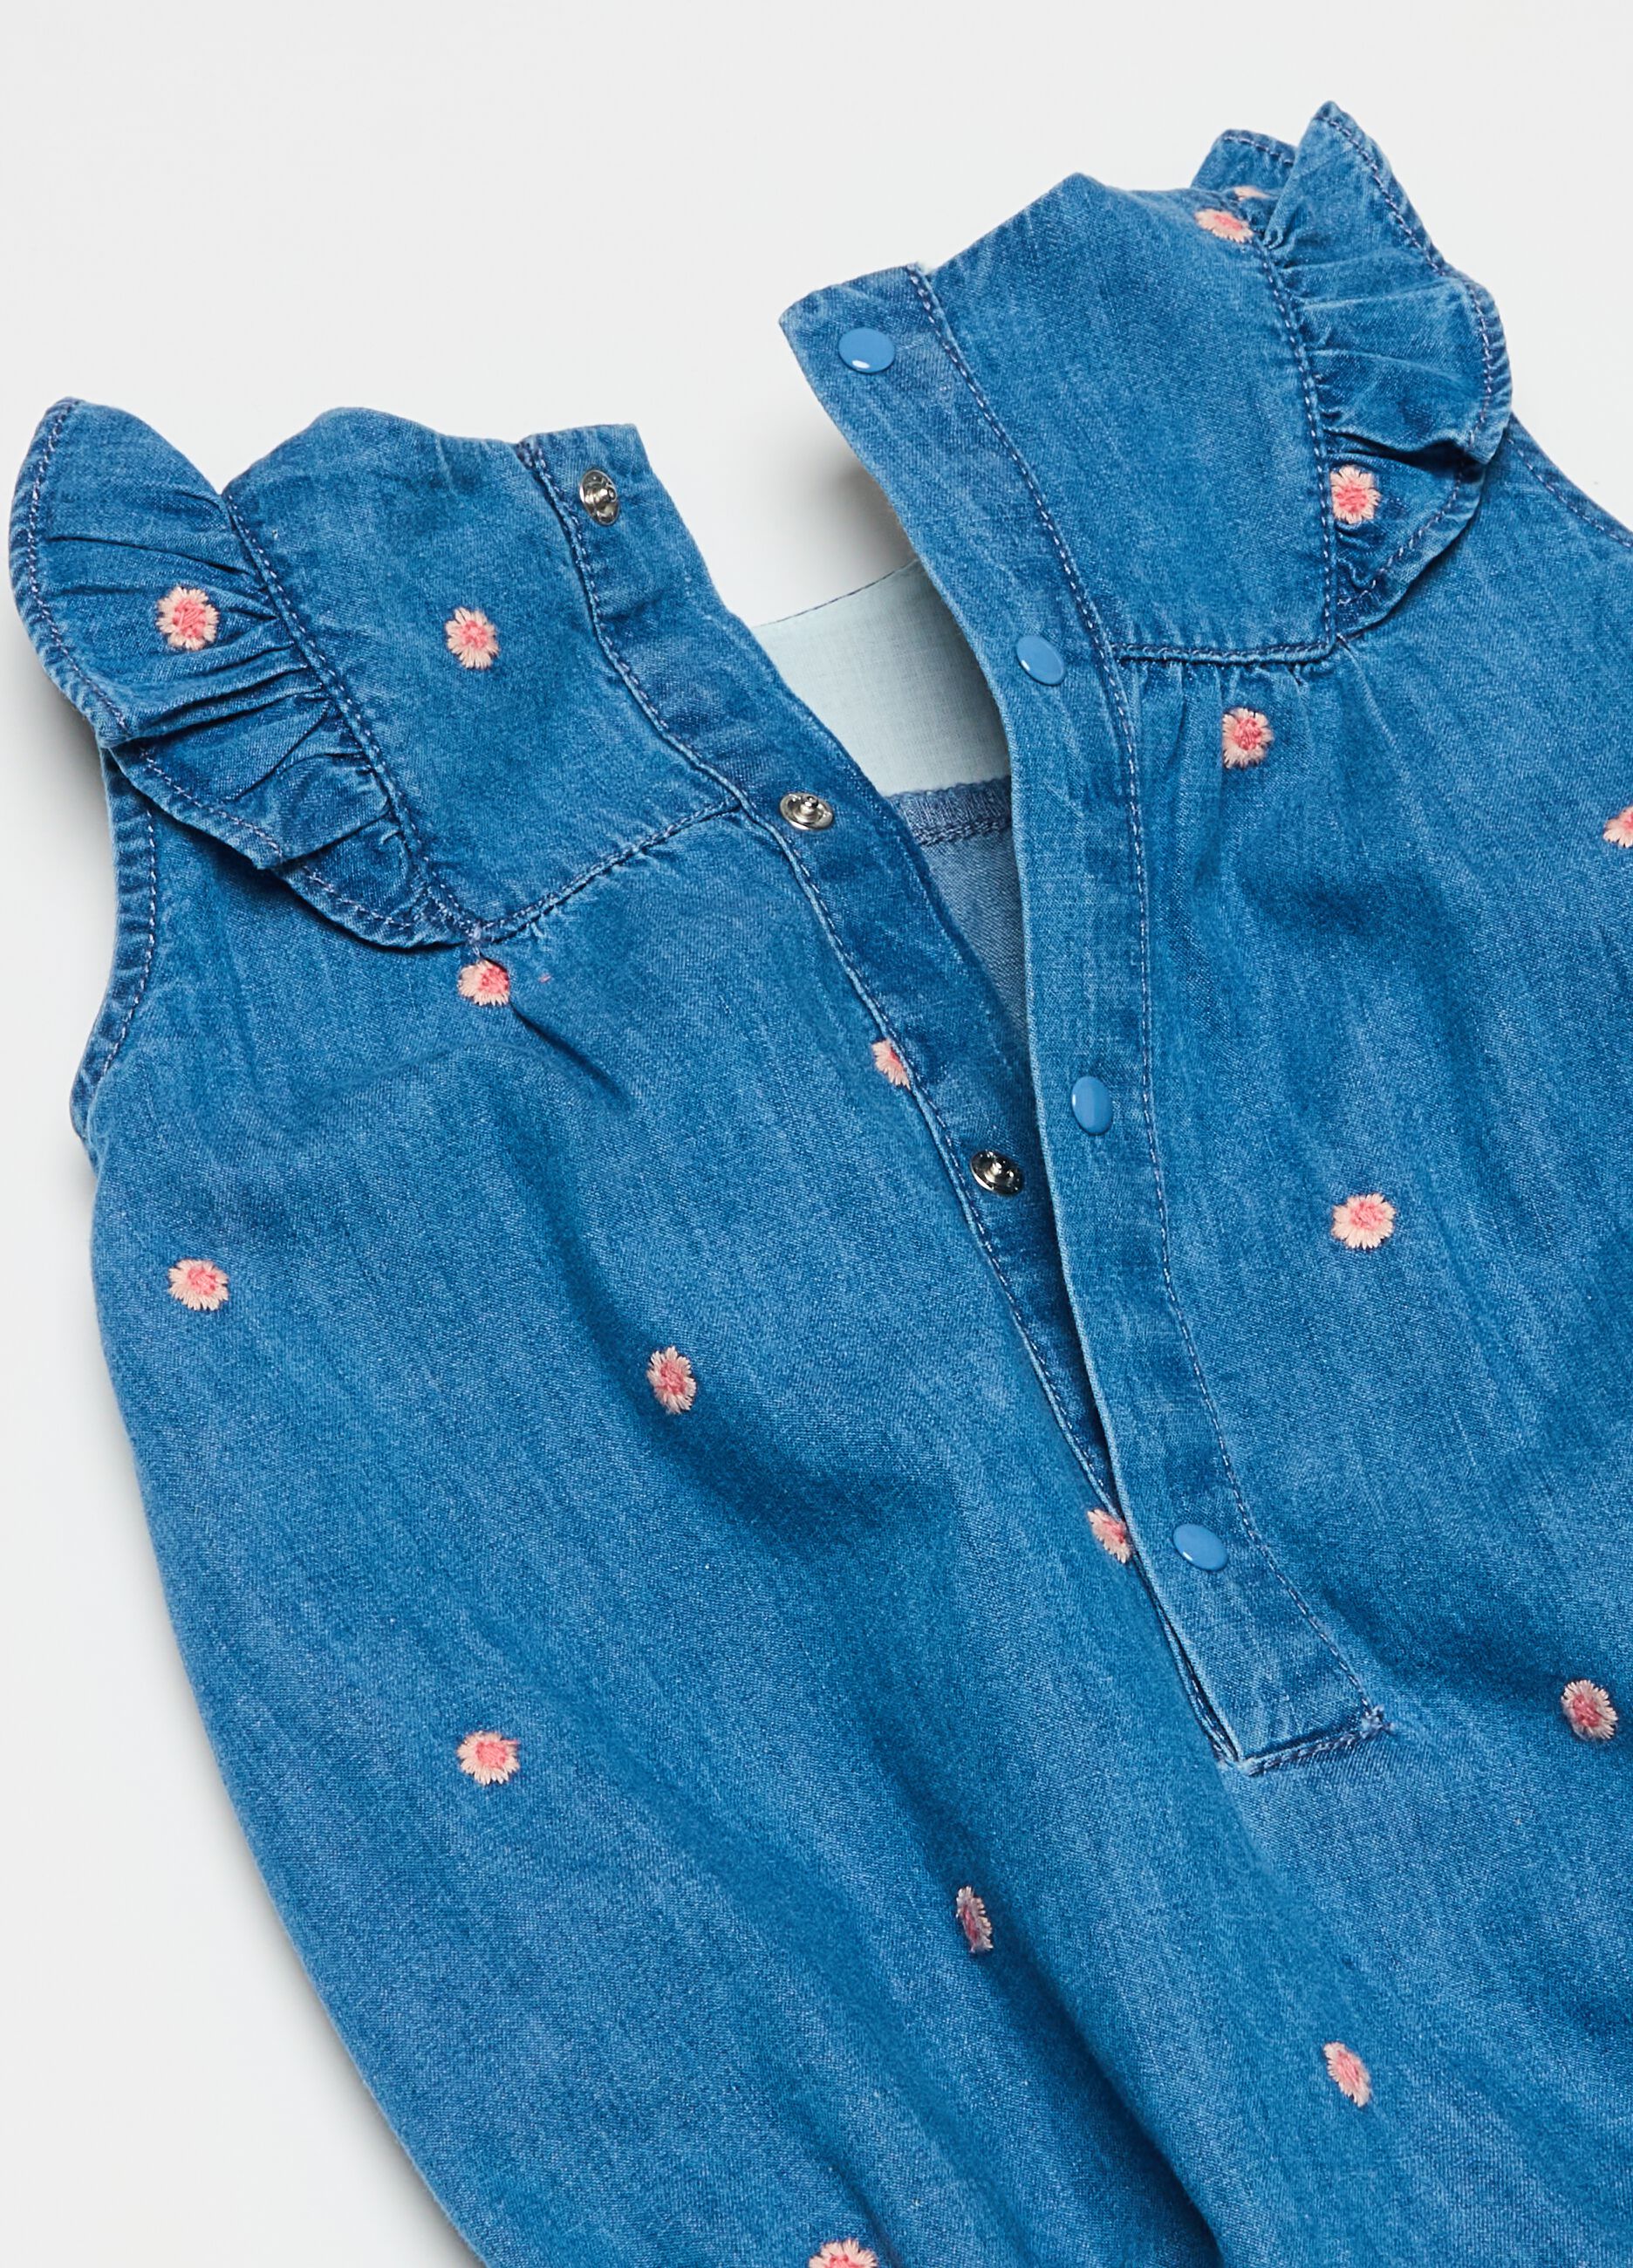 Denim romper suit with small flowers embroidery